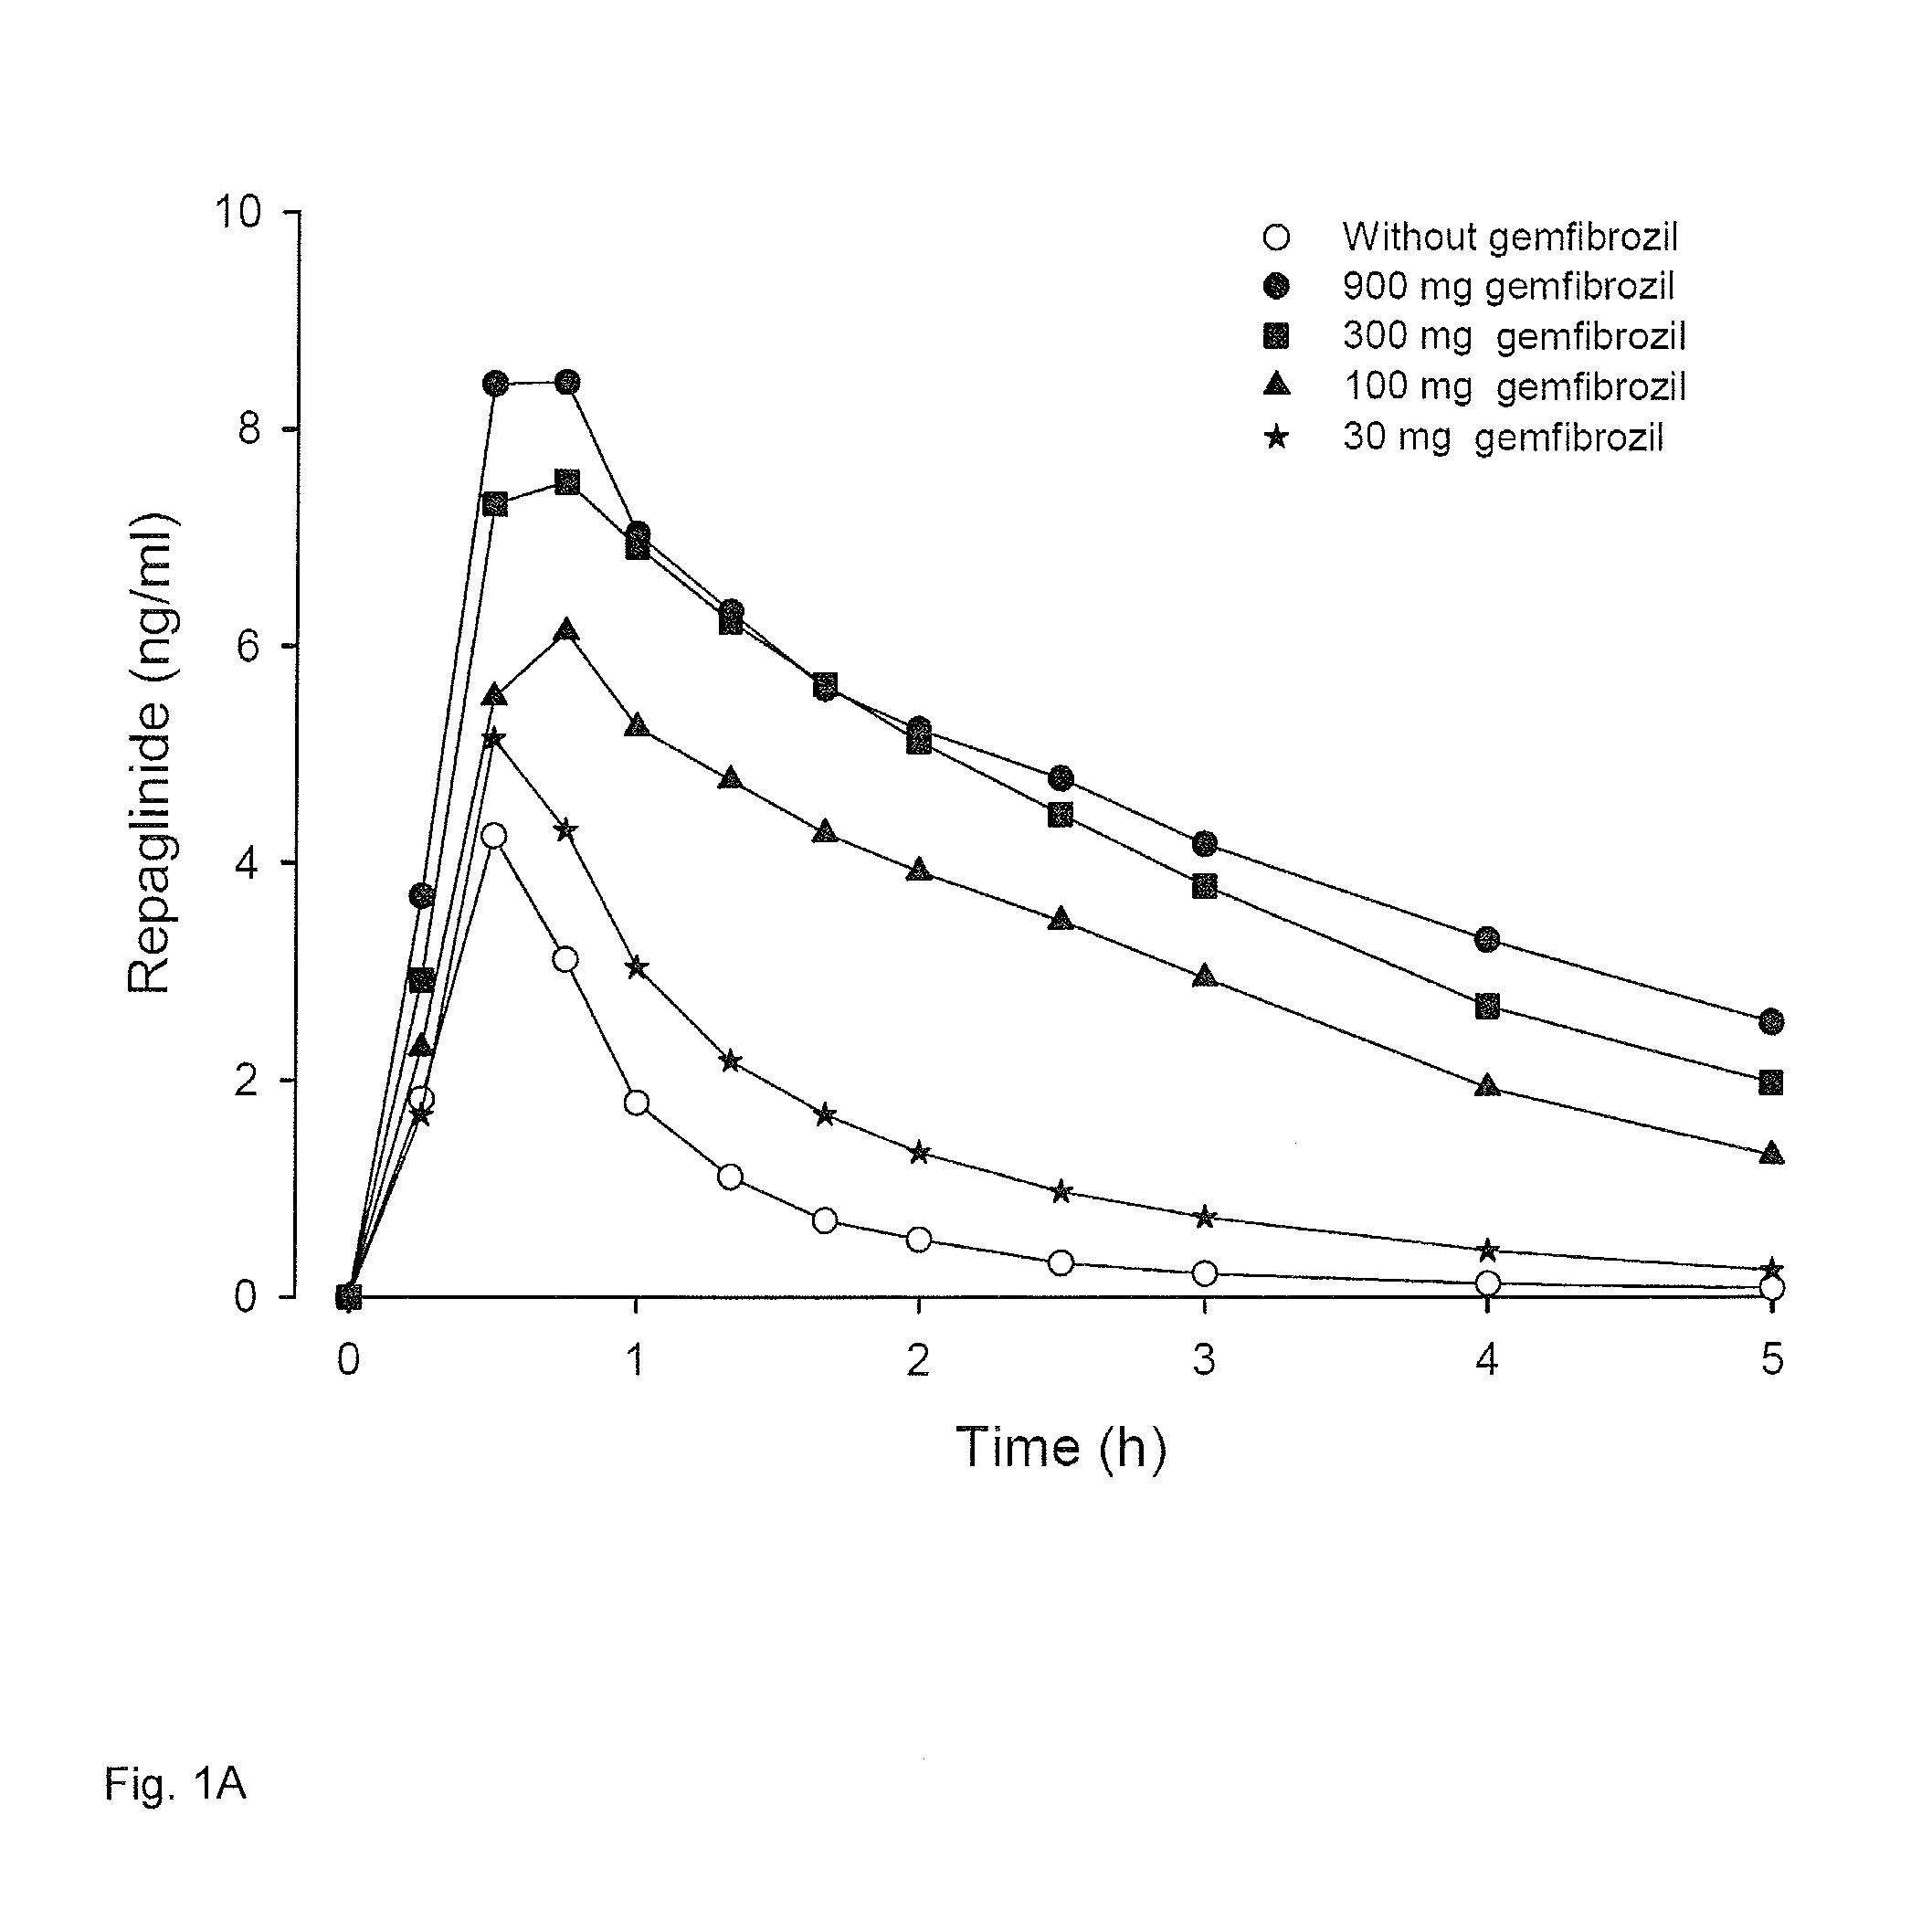 Pharmaceutical composition comprising gemfibrozil and cyp2c8 and/or oatp substrate drug such as repaglinide